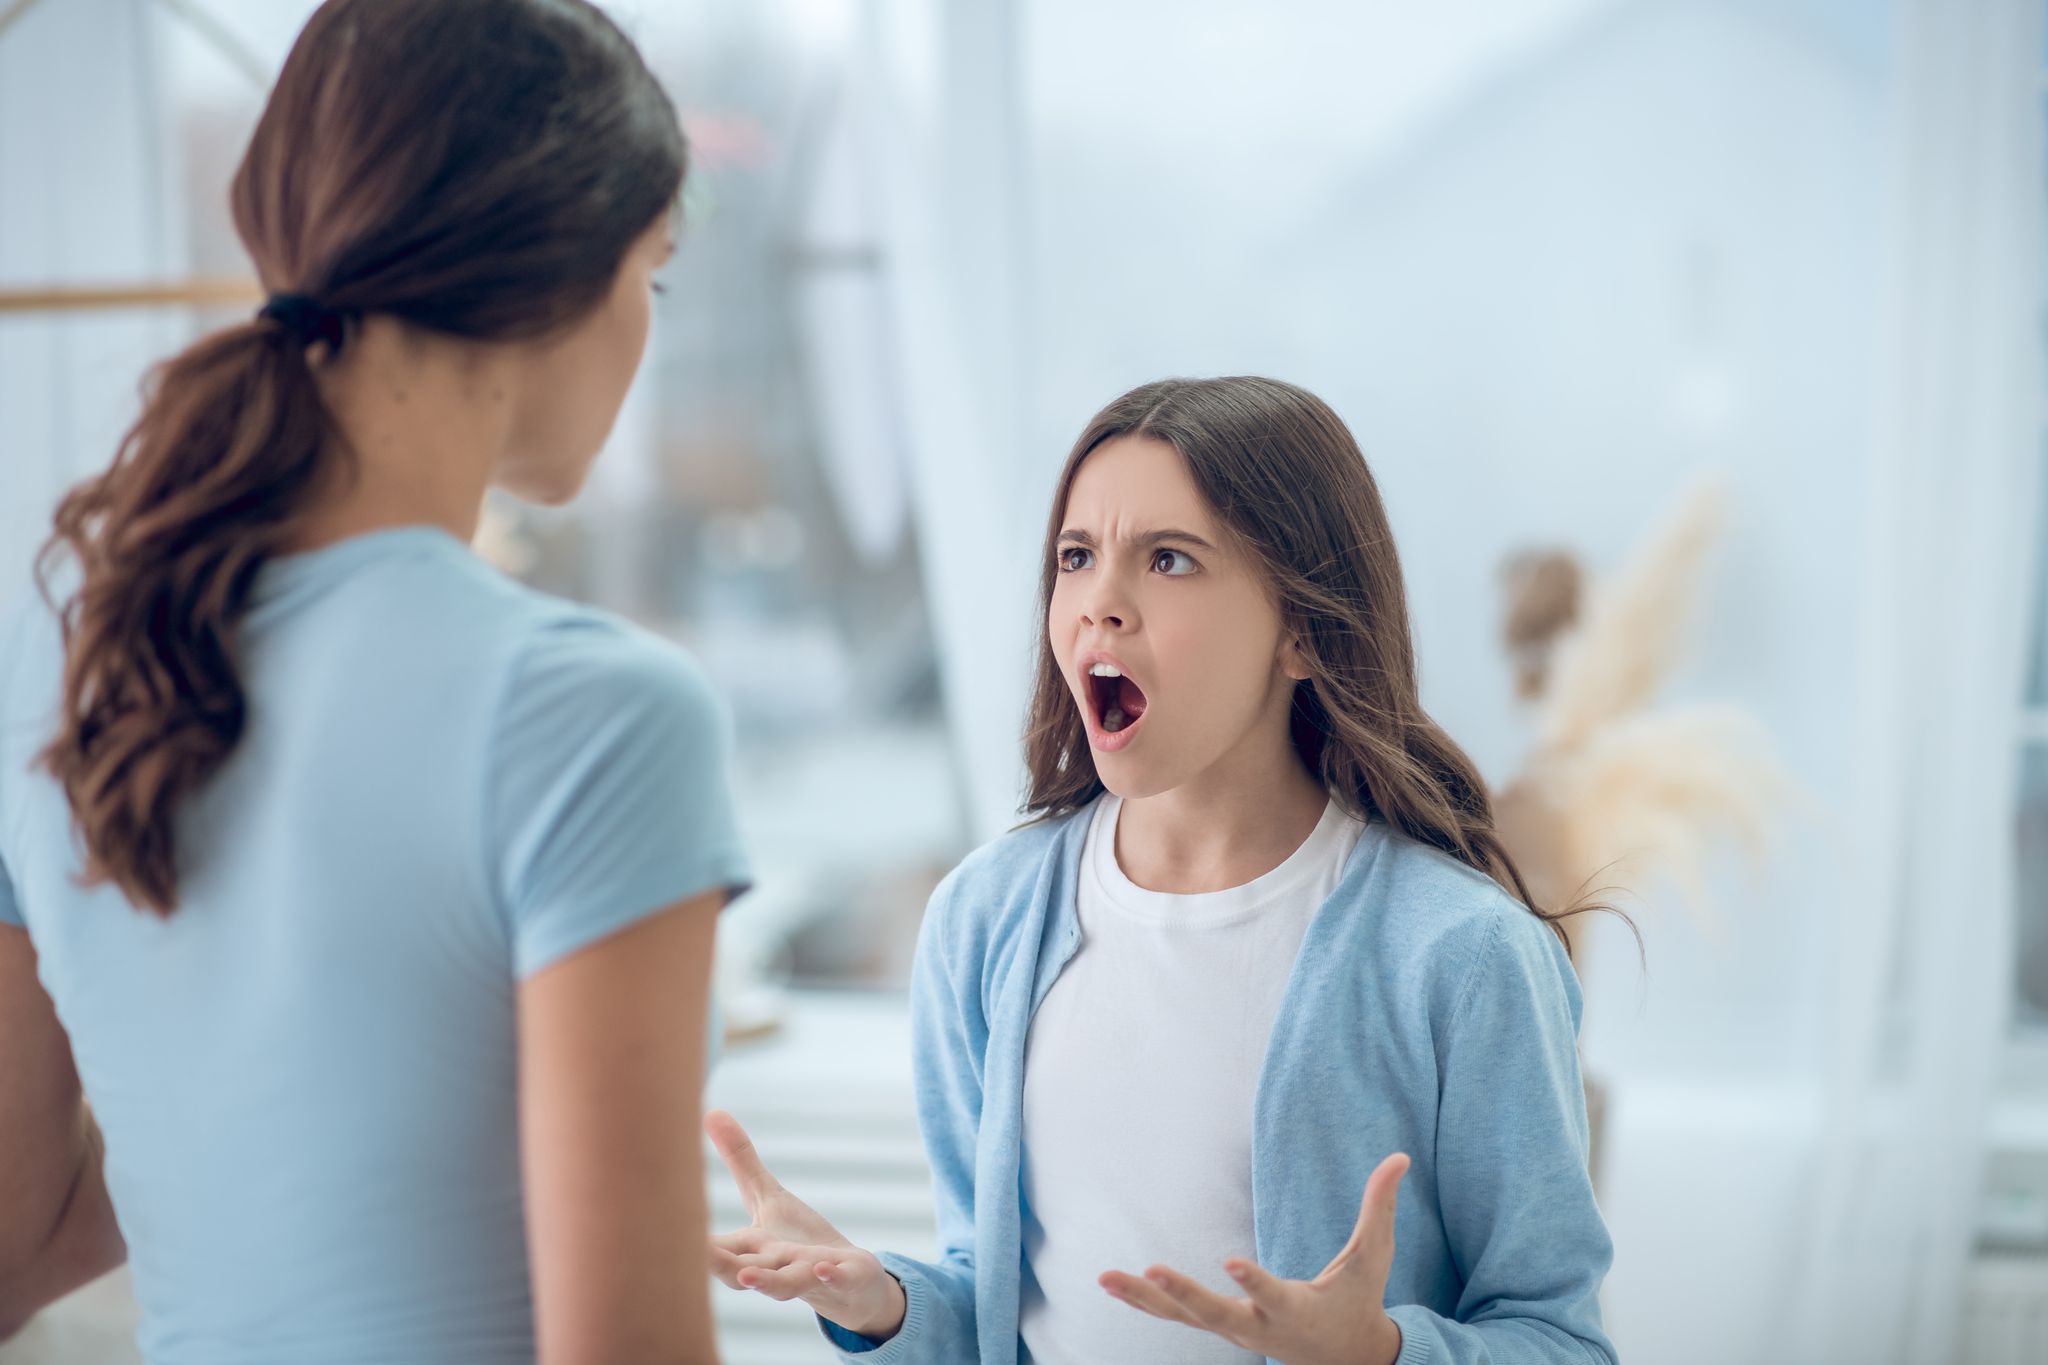 A girl screaming at her mother. | Source: Getty Images